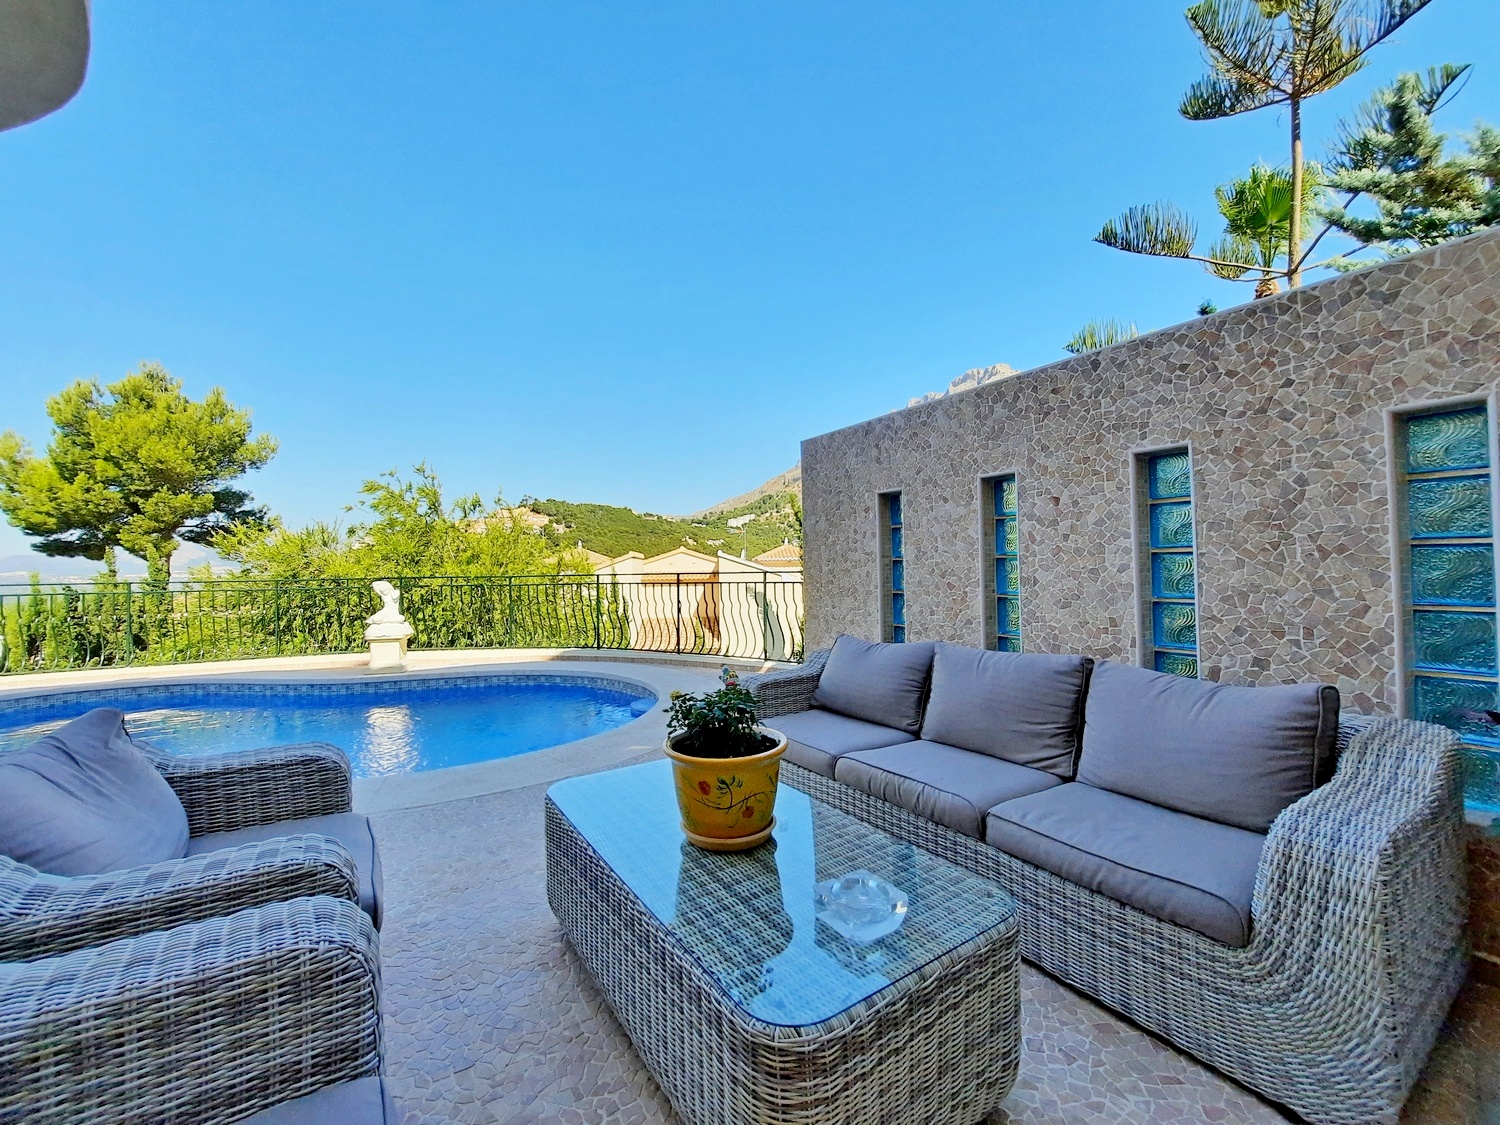 Mediterranean style villa with panoramic views in Altea